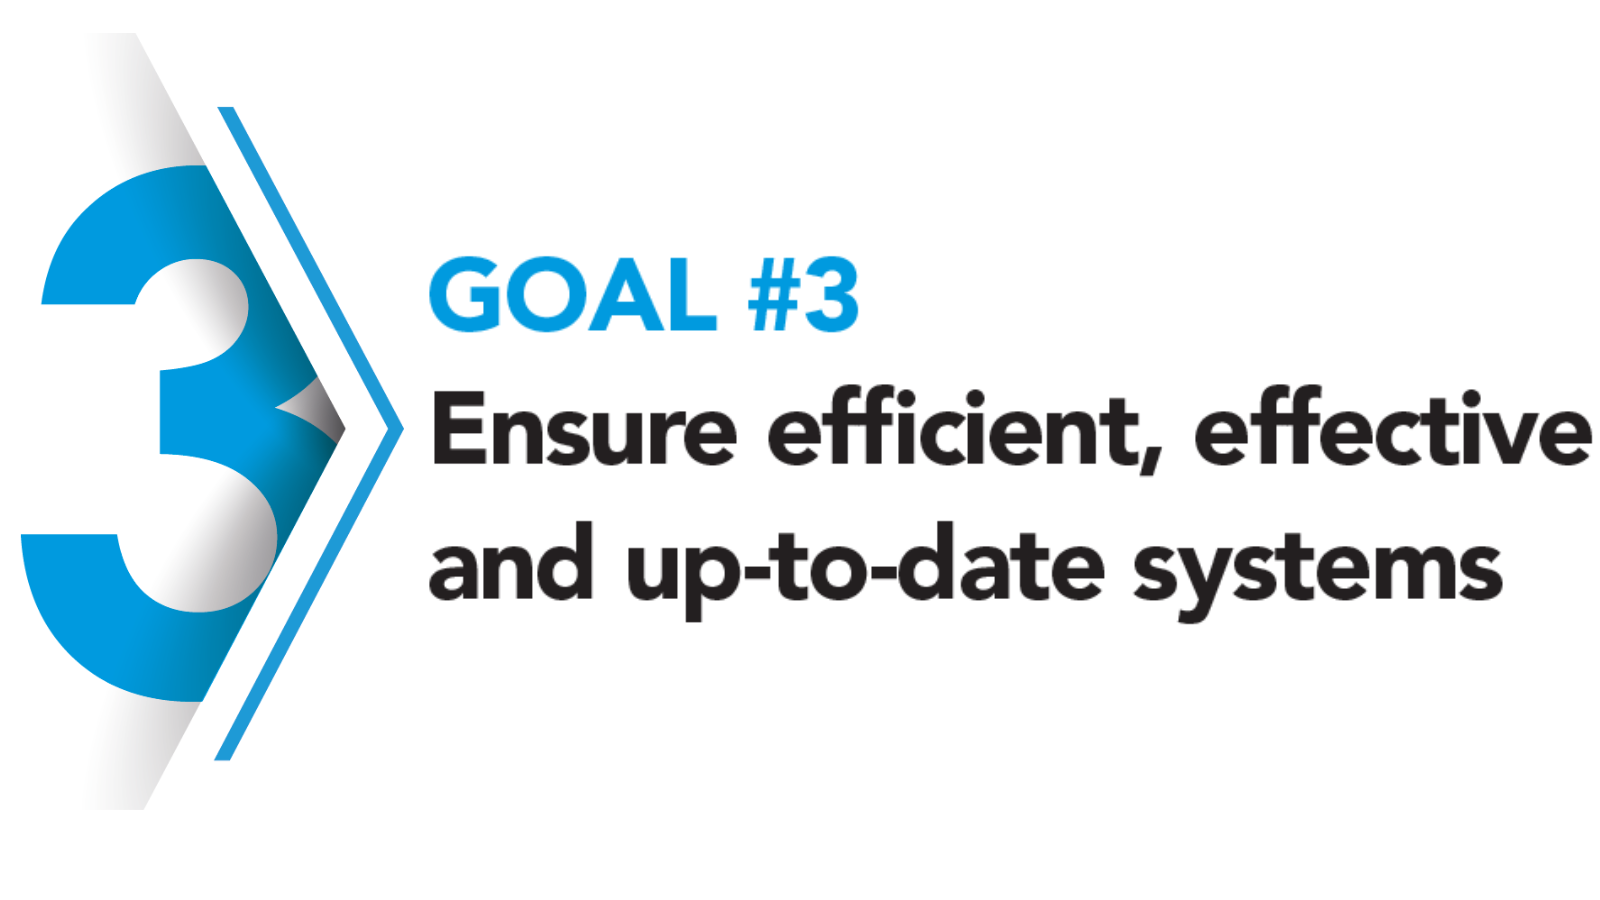 Goal 3" Ensure efficient, effective and up-to-date systems.